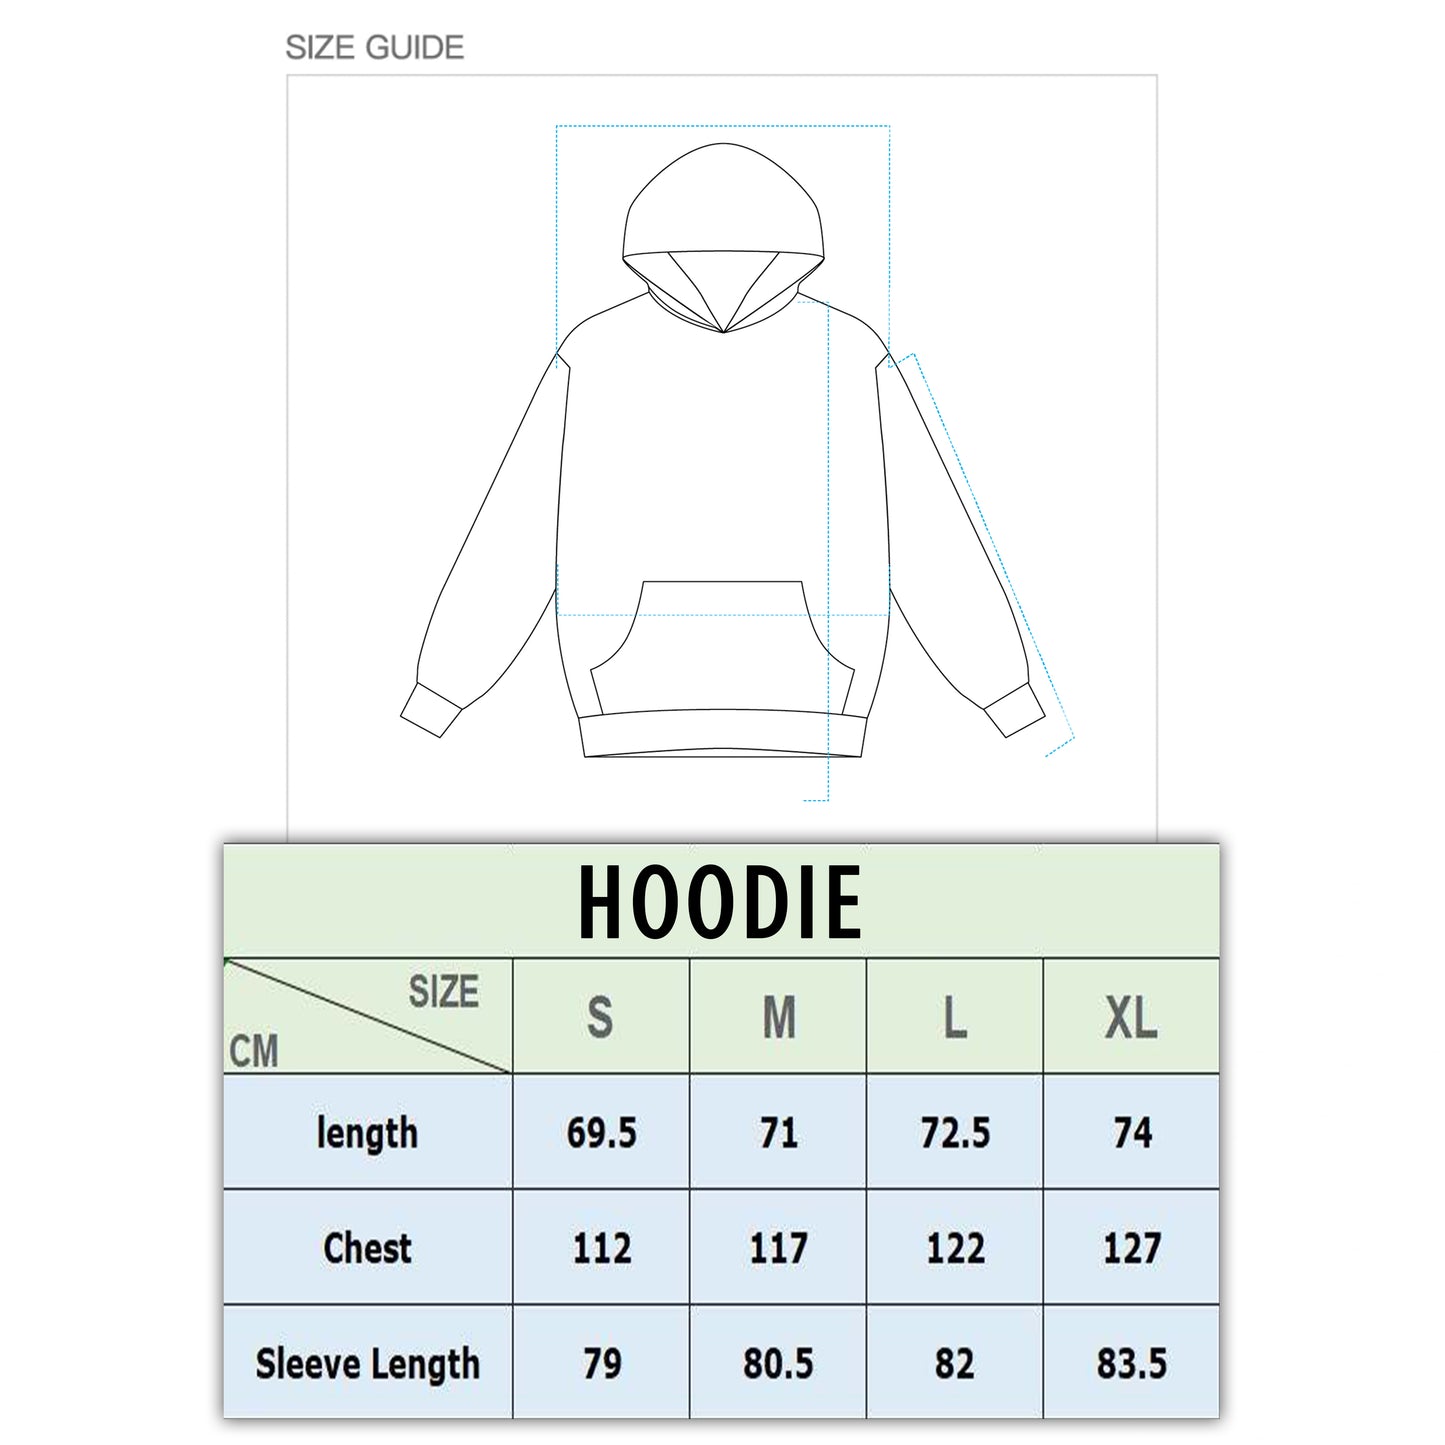 RED HOODIE – Busy Clothing